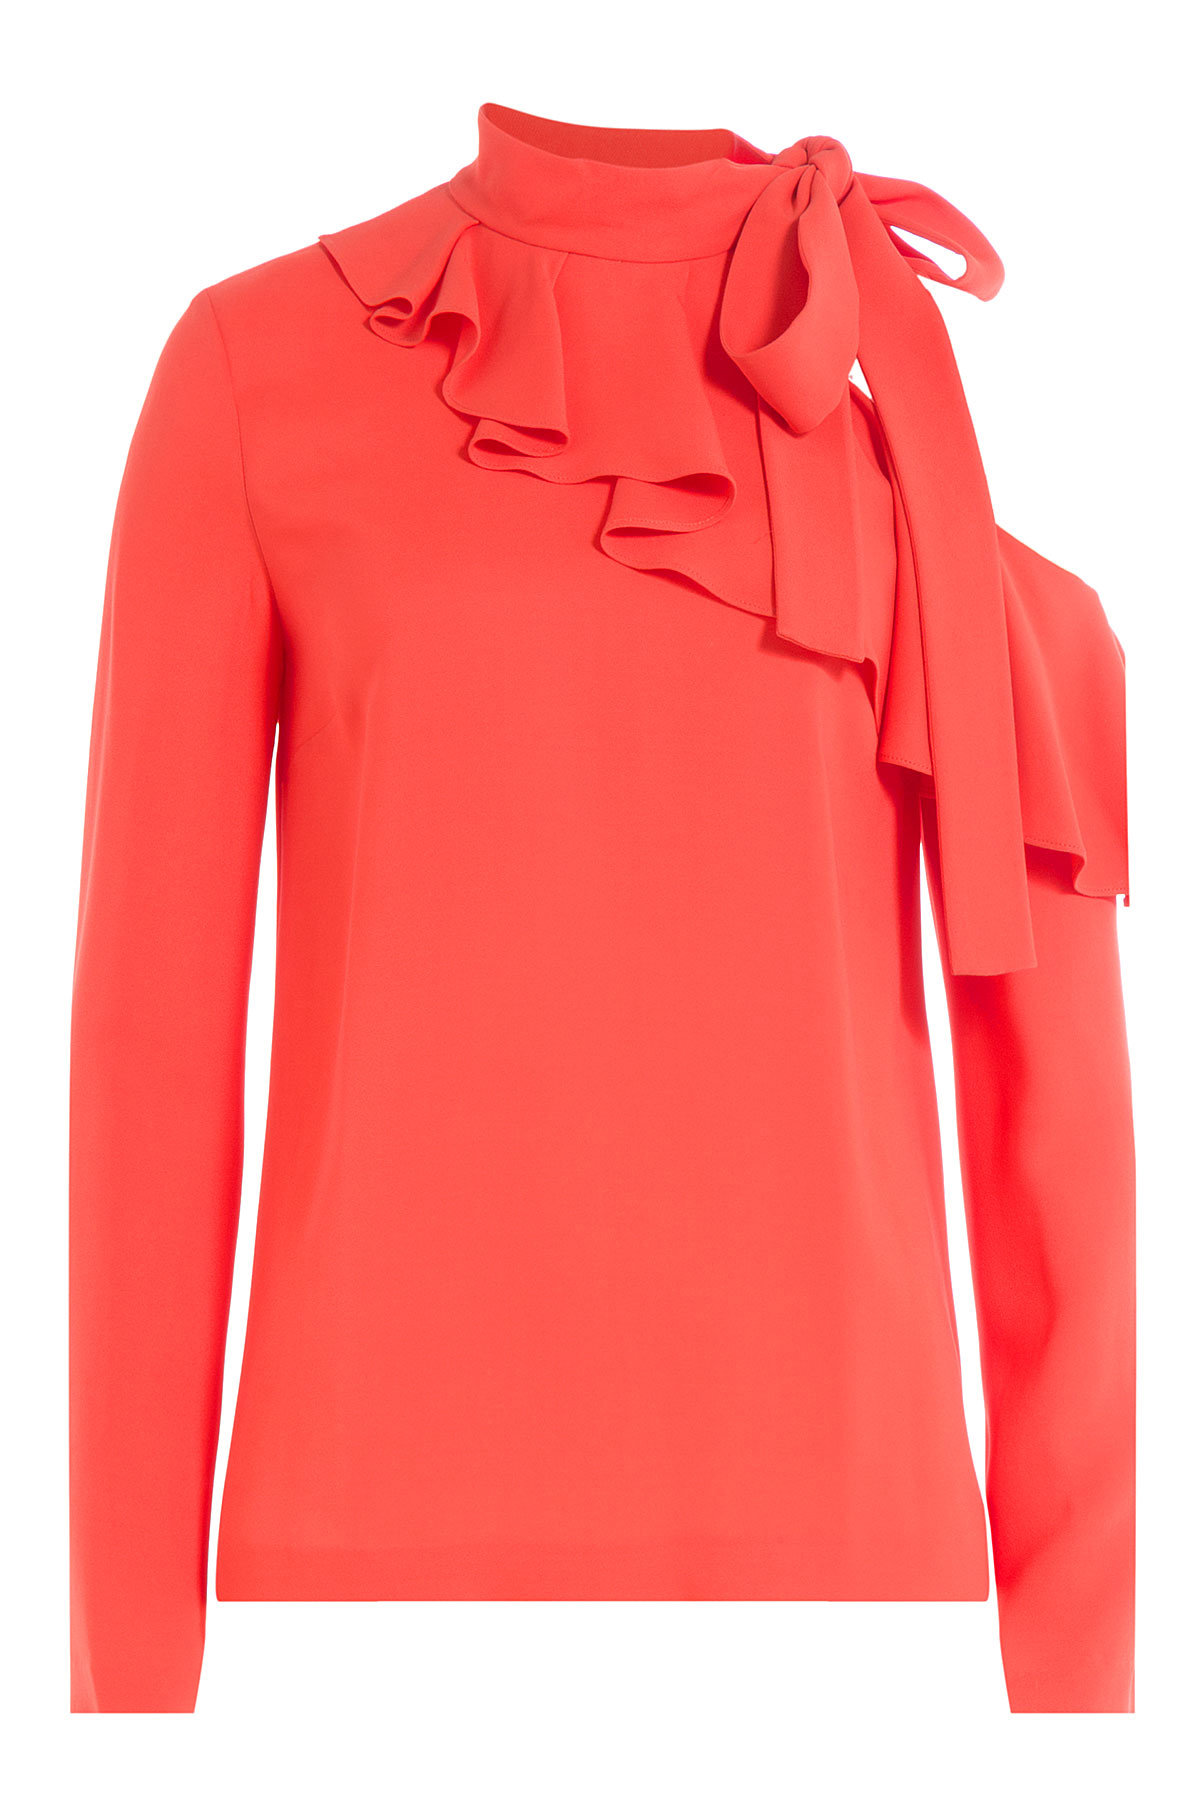 Emilio Pucci - Top with Cut-Out Shoulder and Ruffles Front